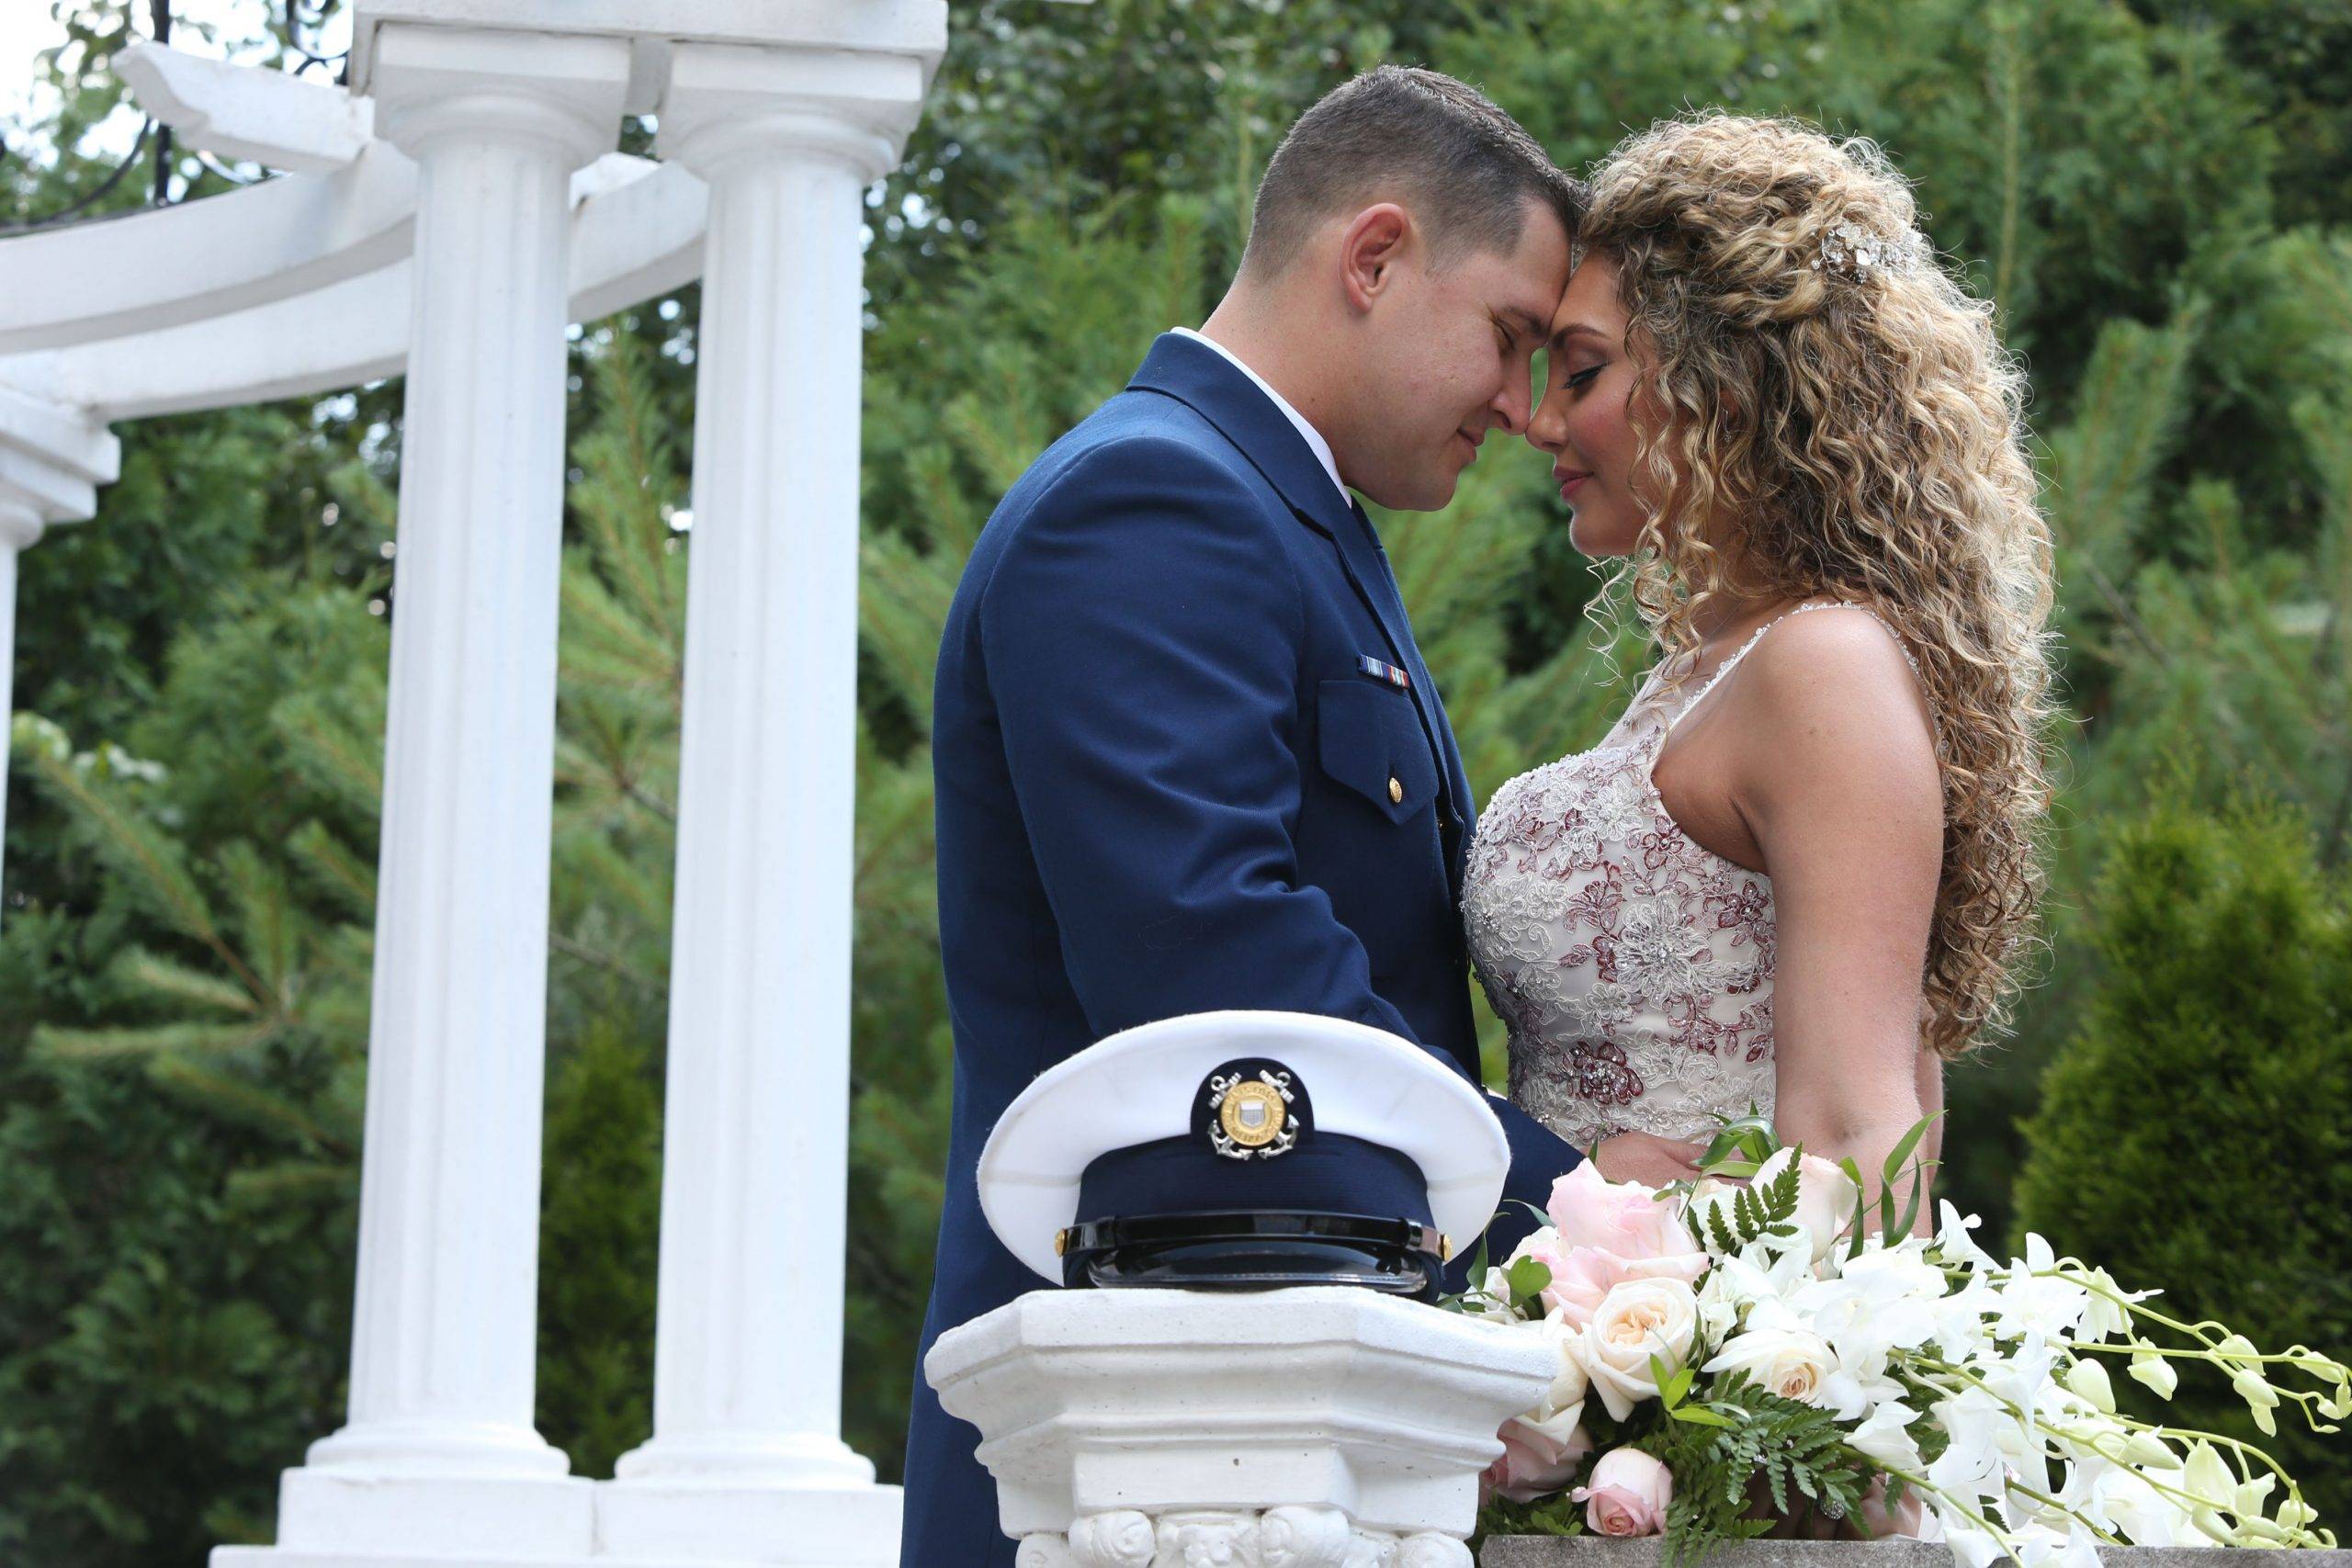 A bride and groom embracing in front of a gazebo.